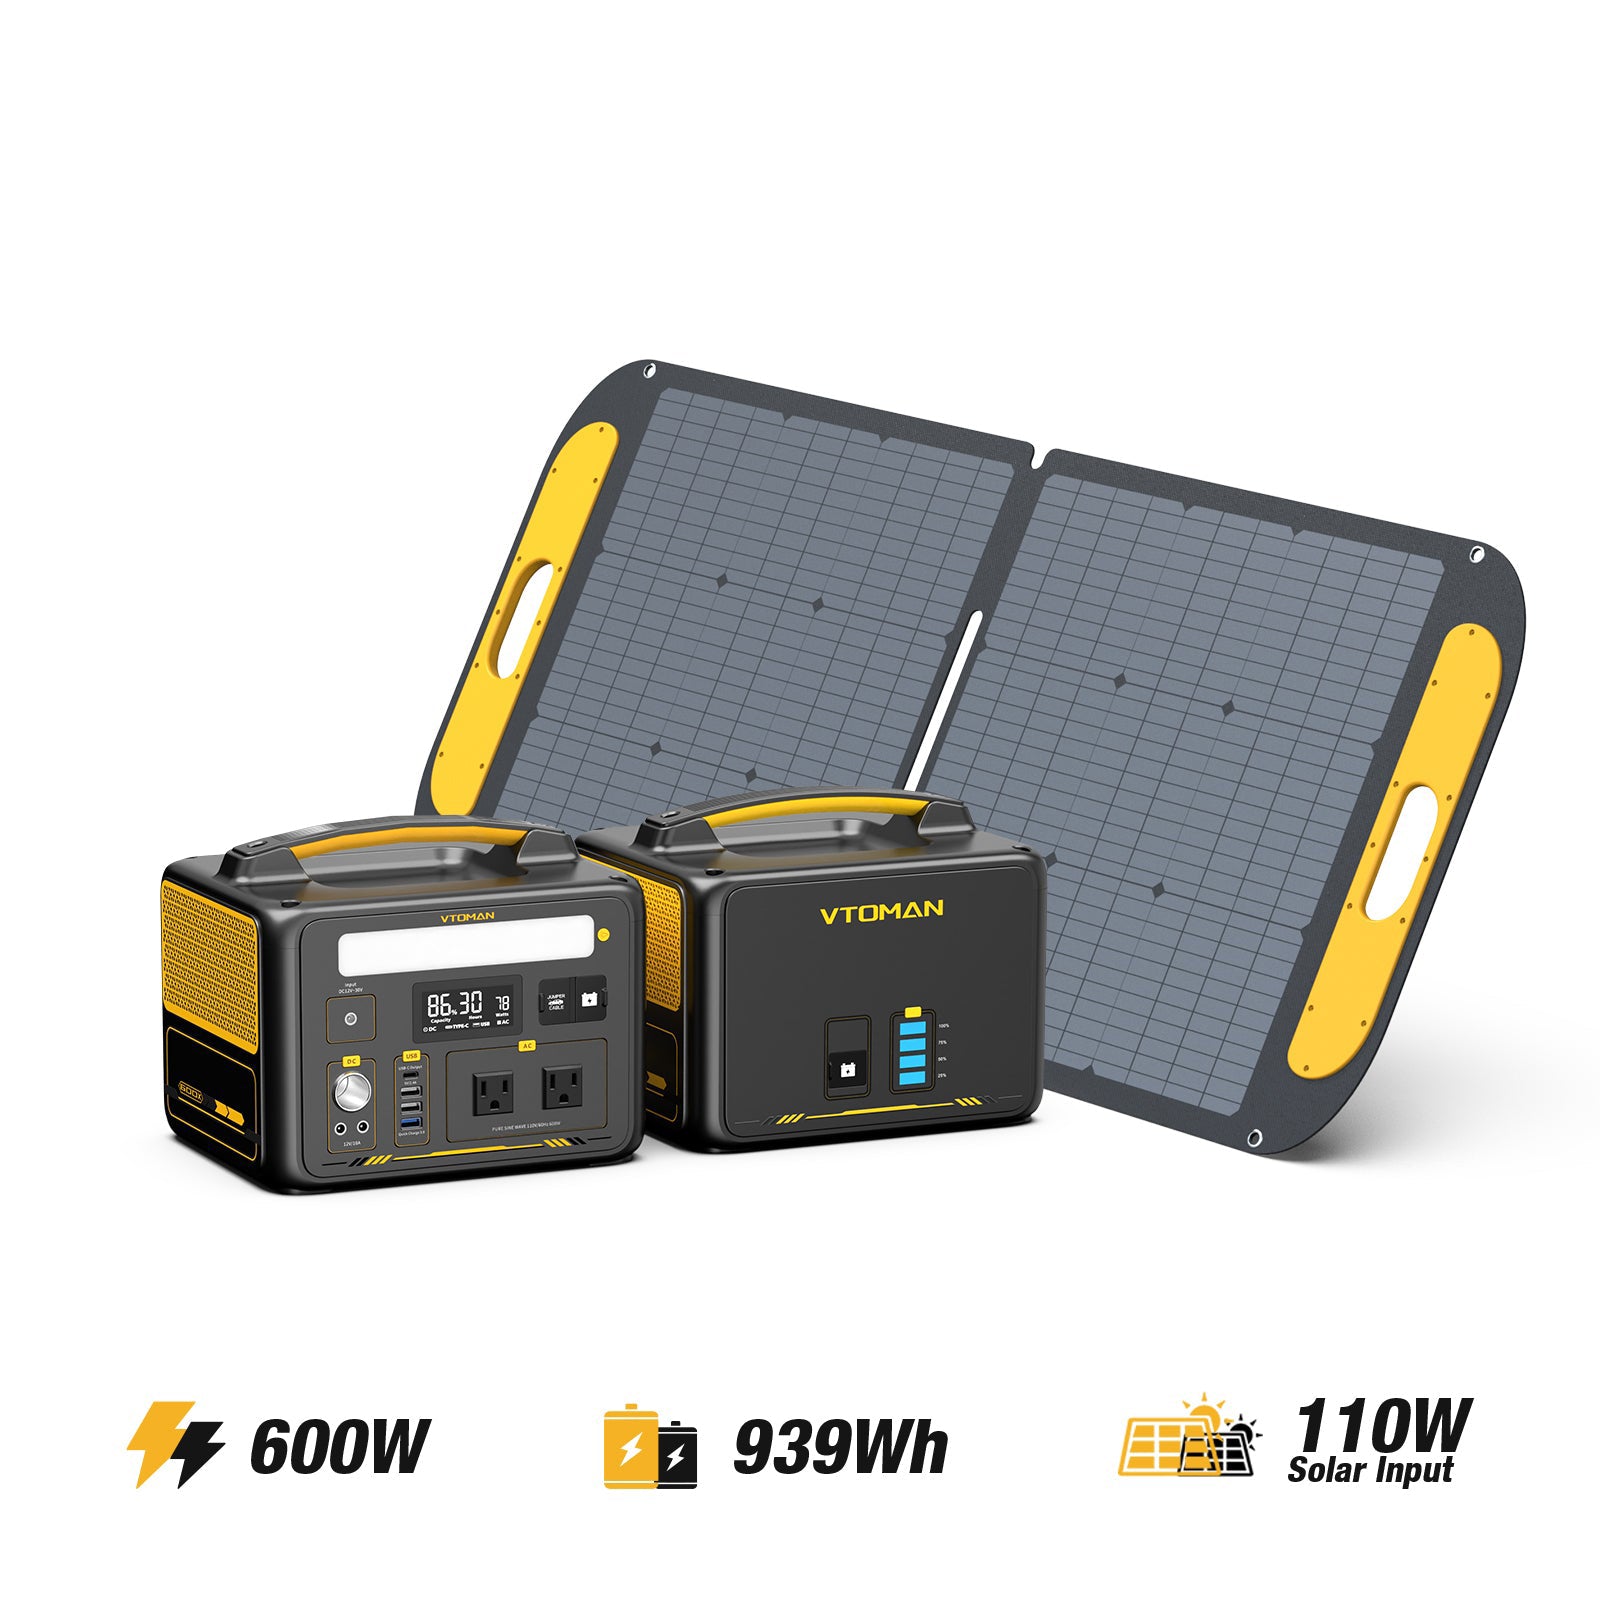 jump 600x power station-AC600W 299wh capacity--640Wh extra battery 110W solar panel